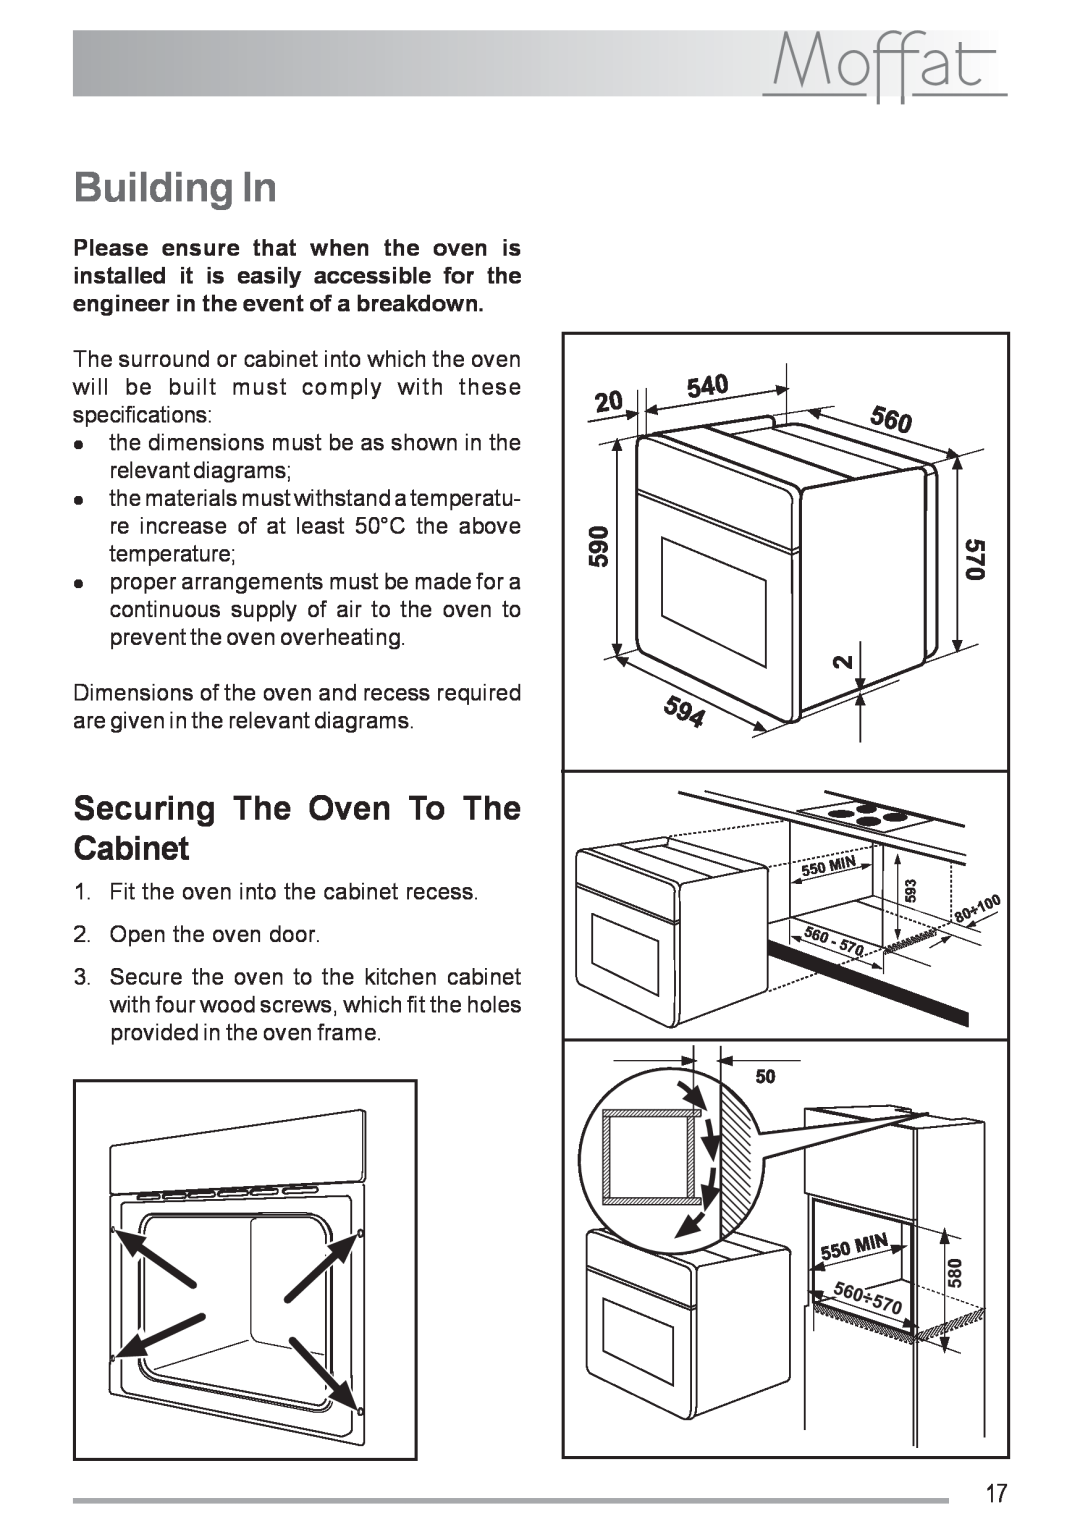 Moffat MSF 611 manual Building In, Securing The Oven To The Cabinet 